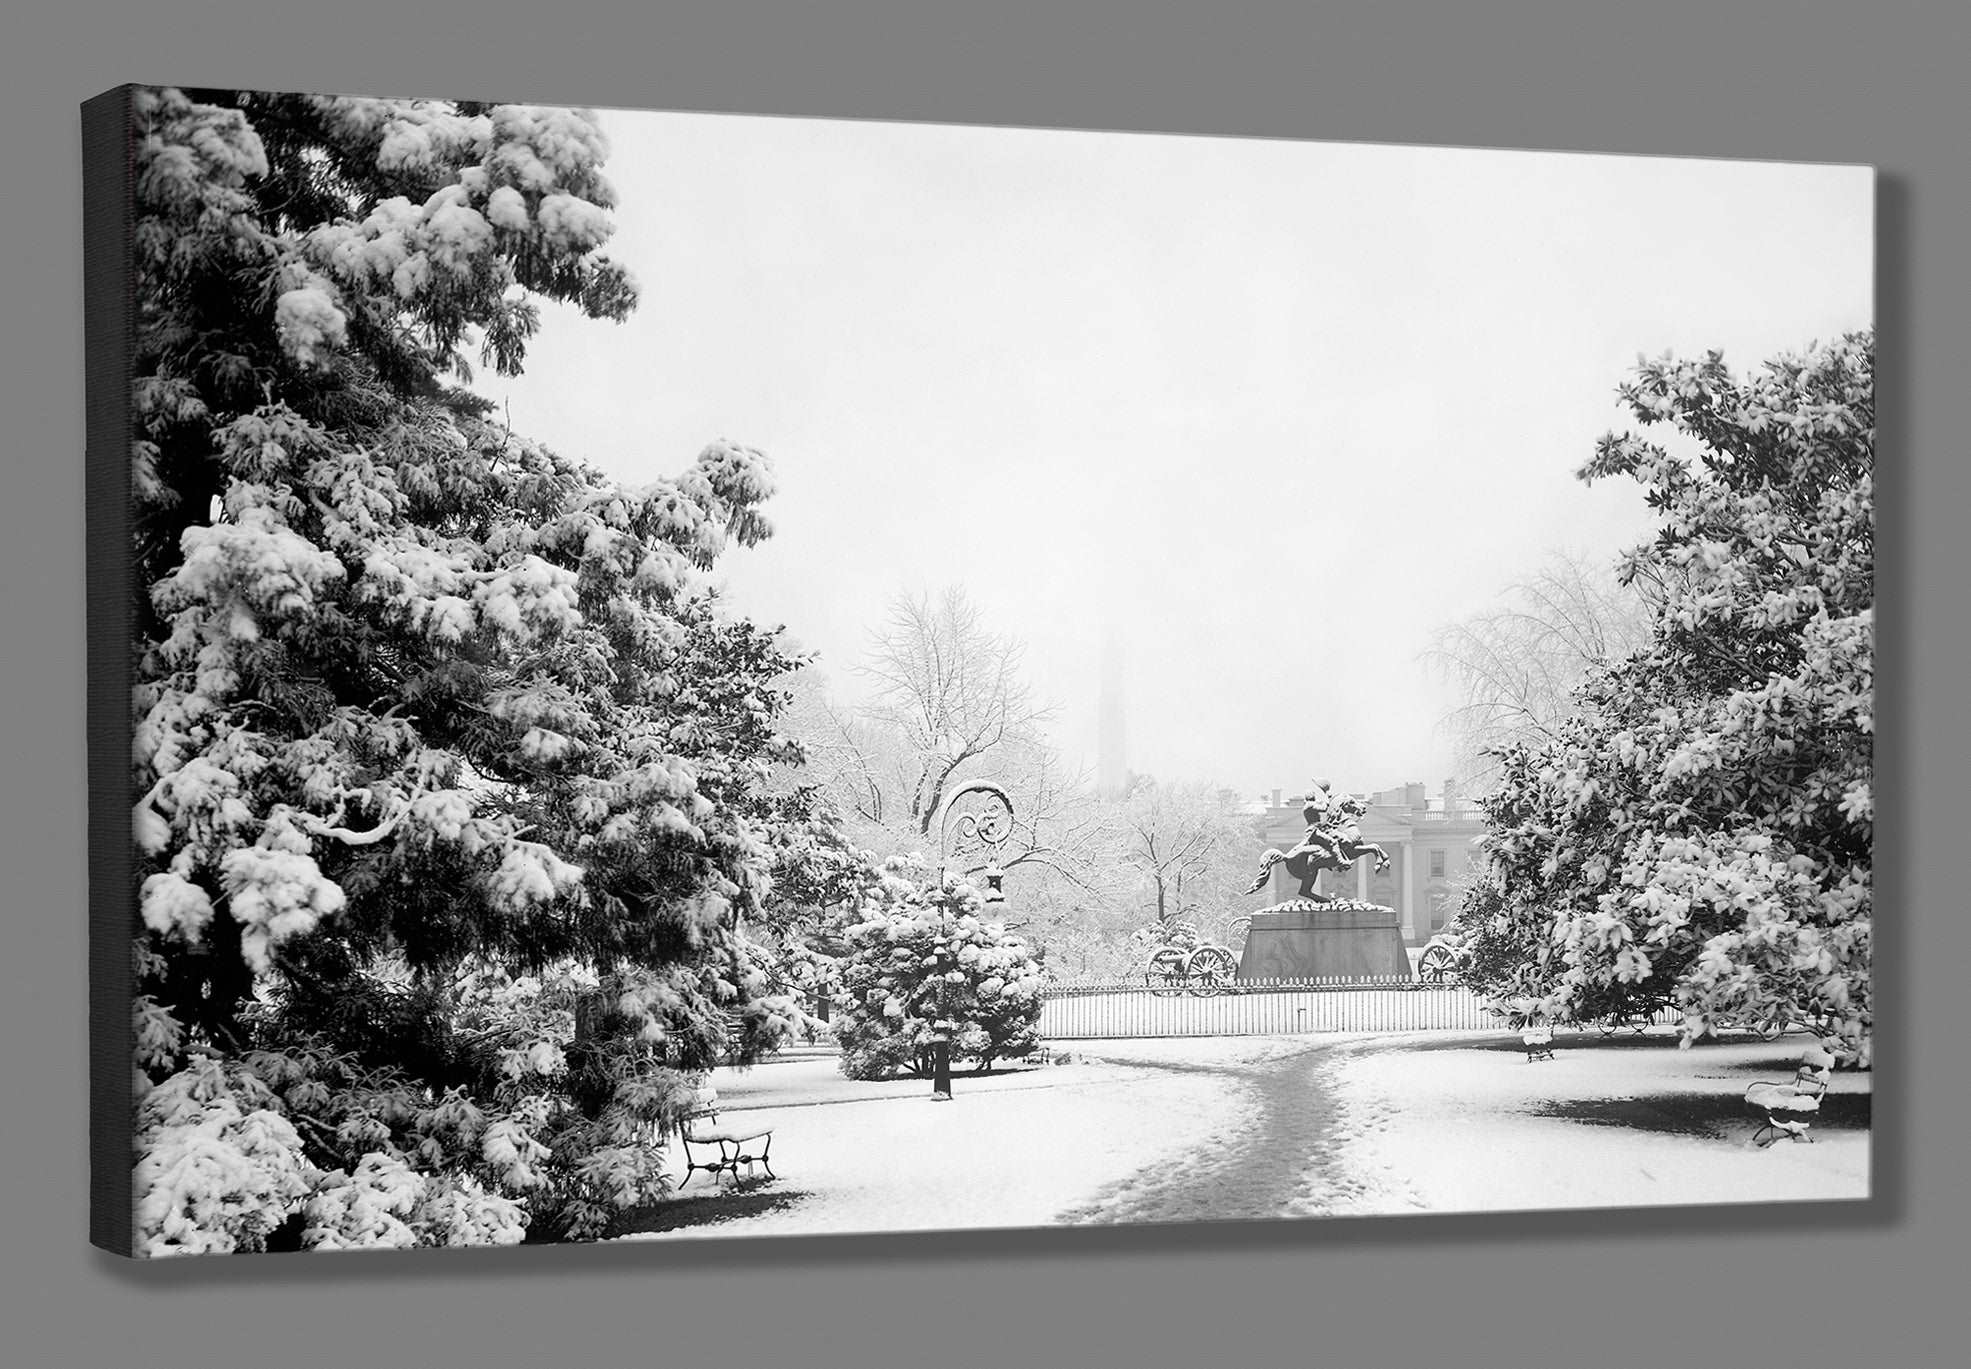 A canvas print reproduction of vintage photography of Washington DC in winter